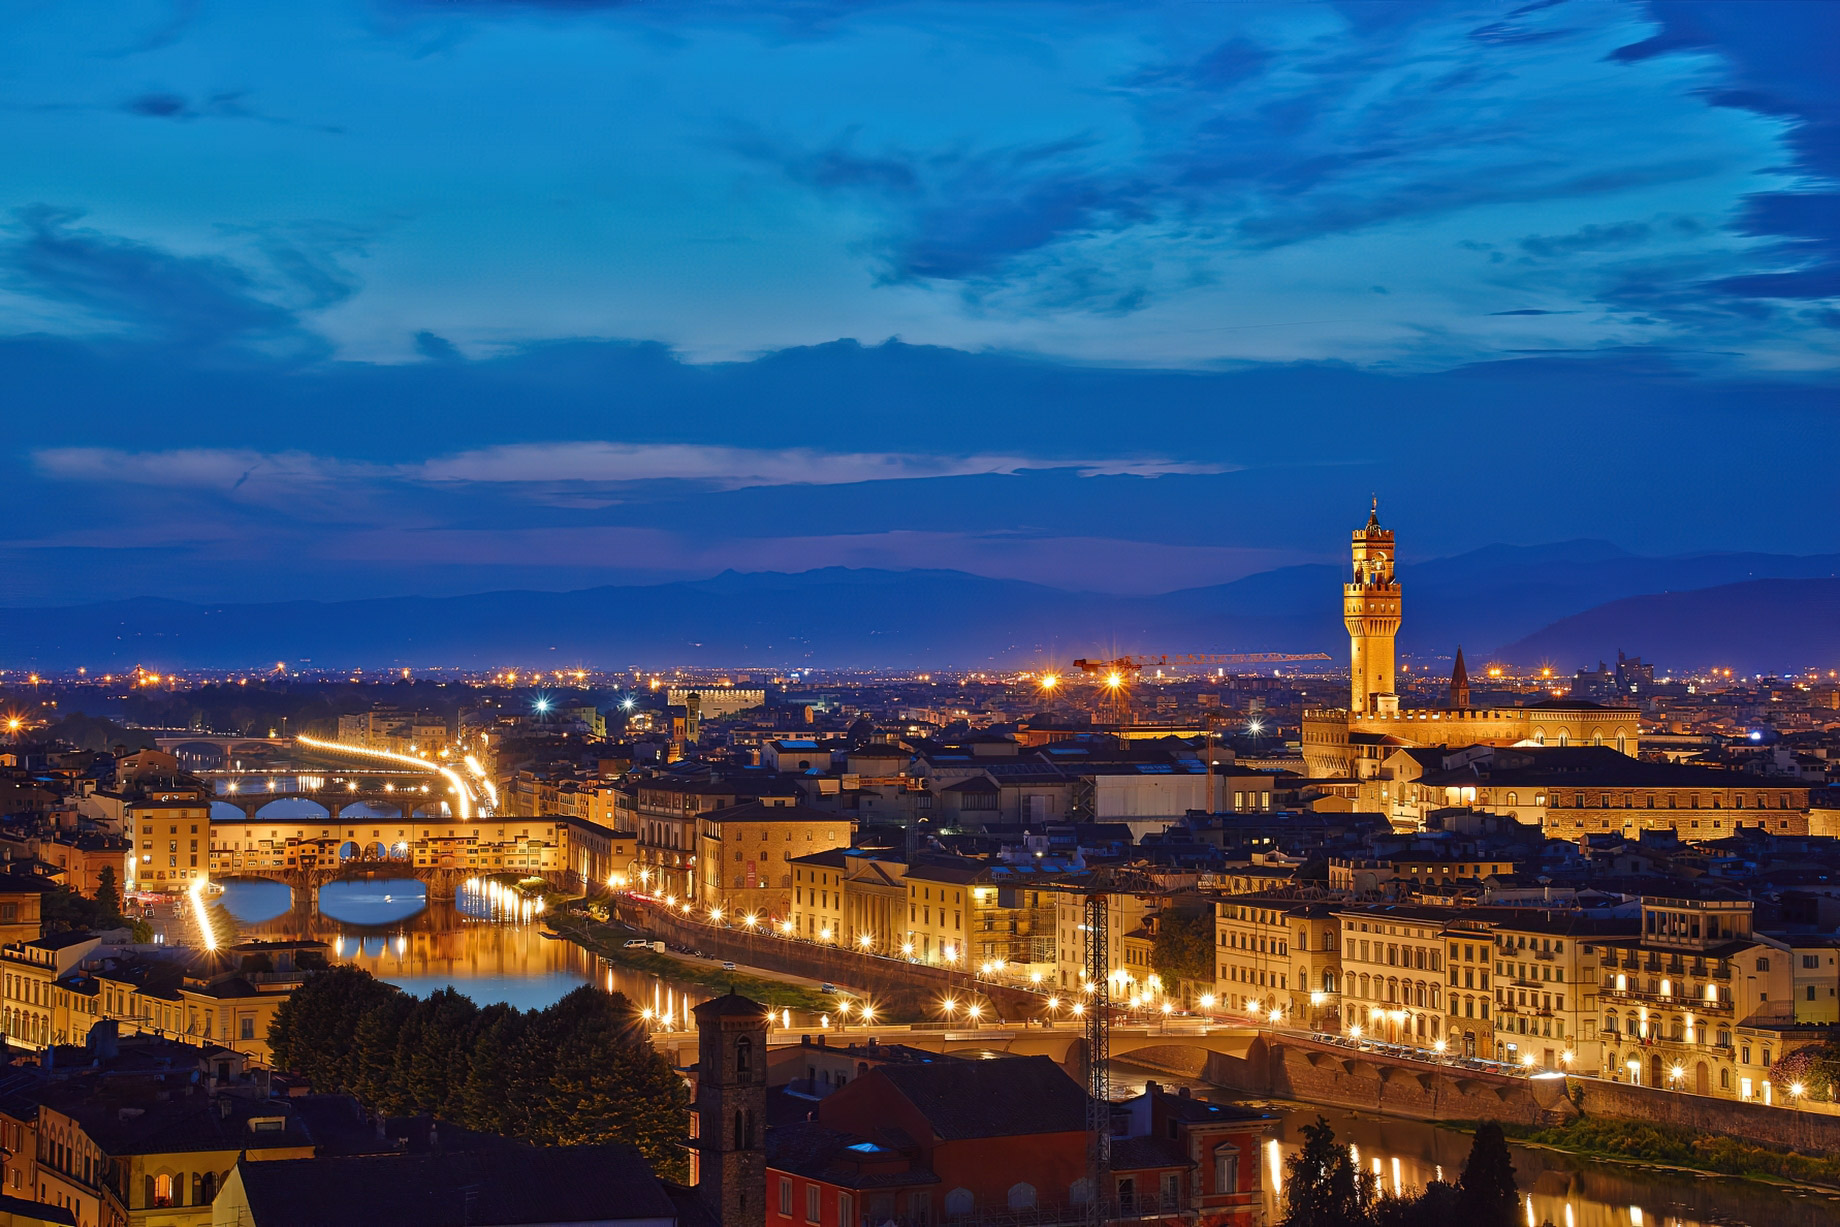 Relais Santa Croce By Baglioni Hotels & Resorts - Florence, Italy - Florence Aerial Night View